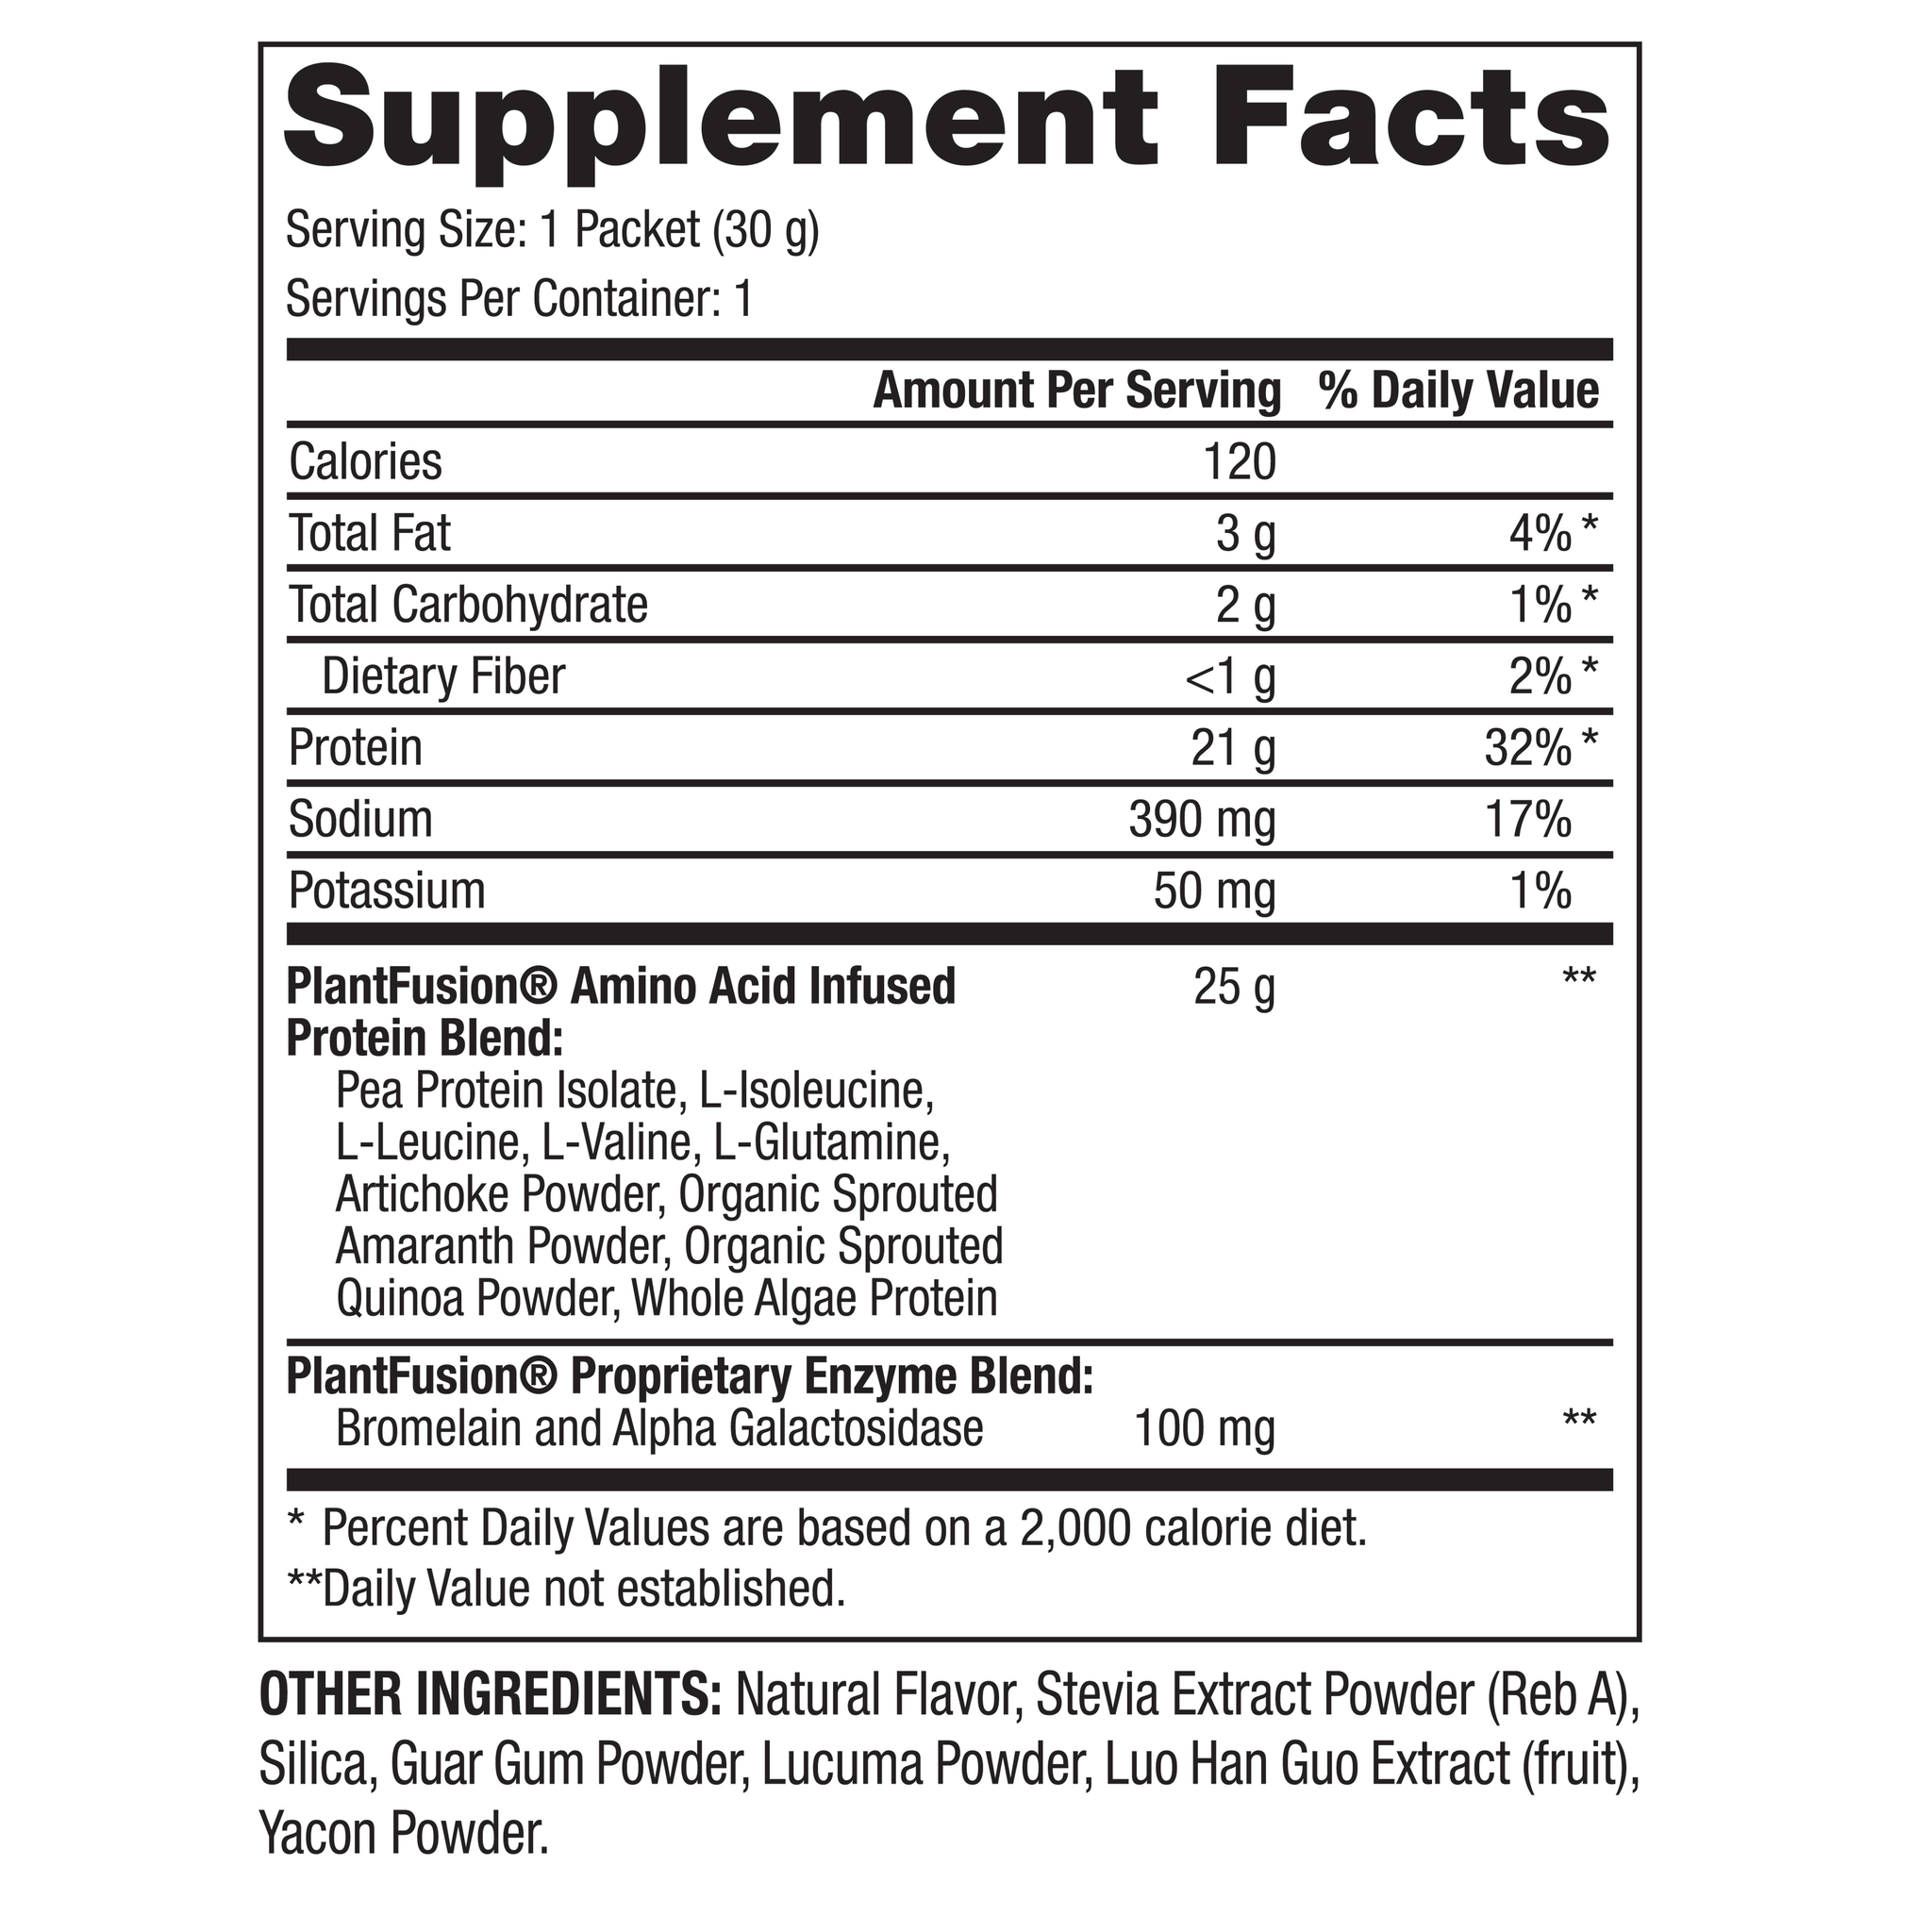 Supplement sample offers